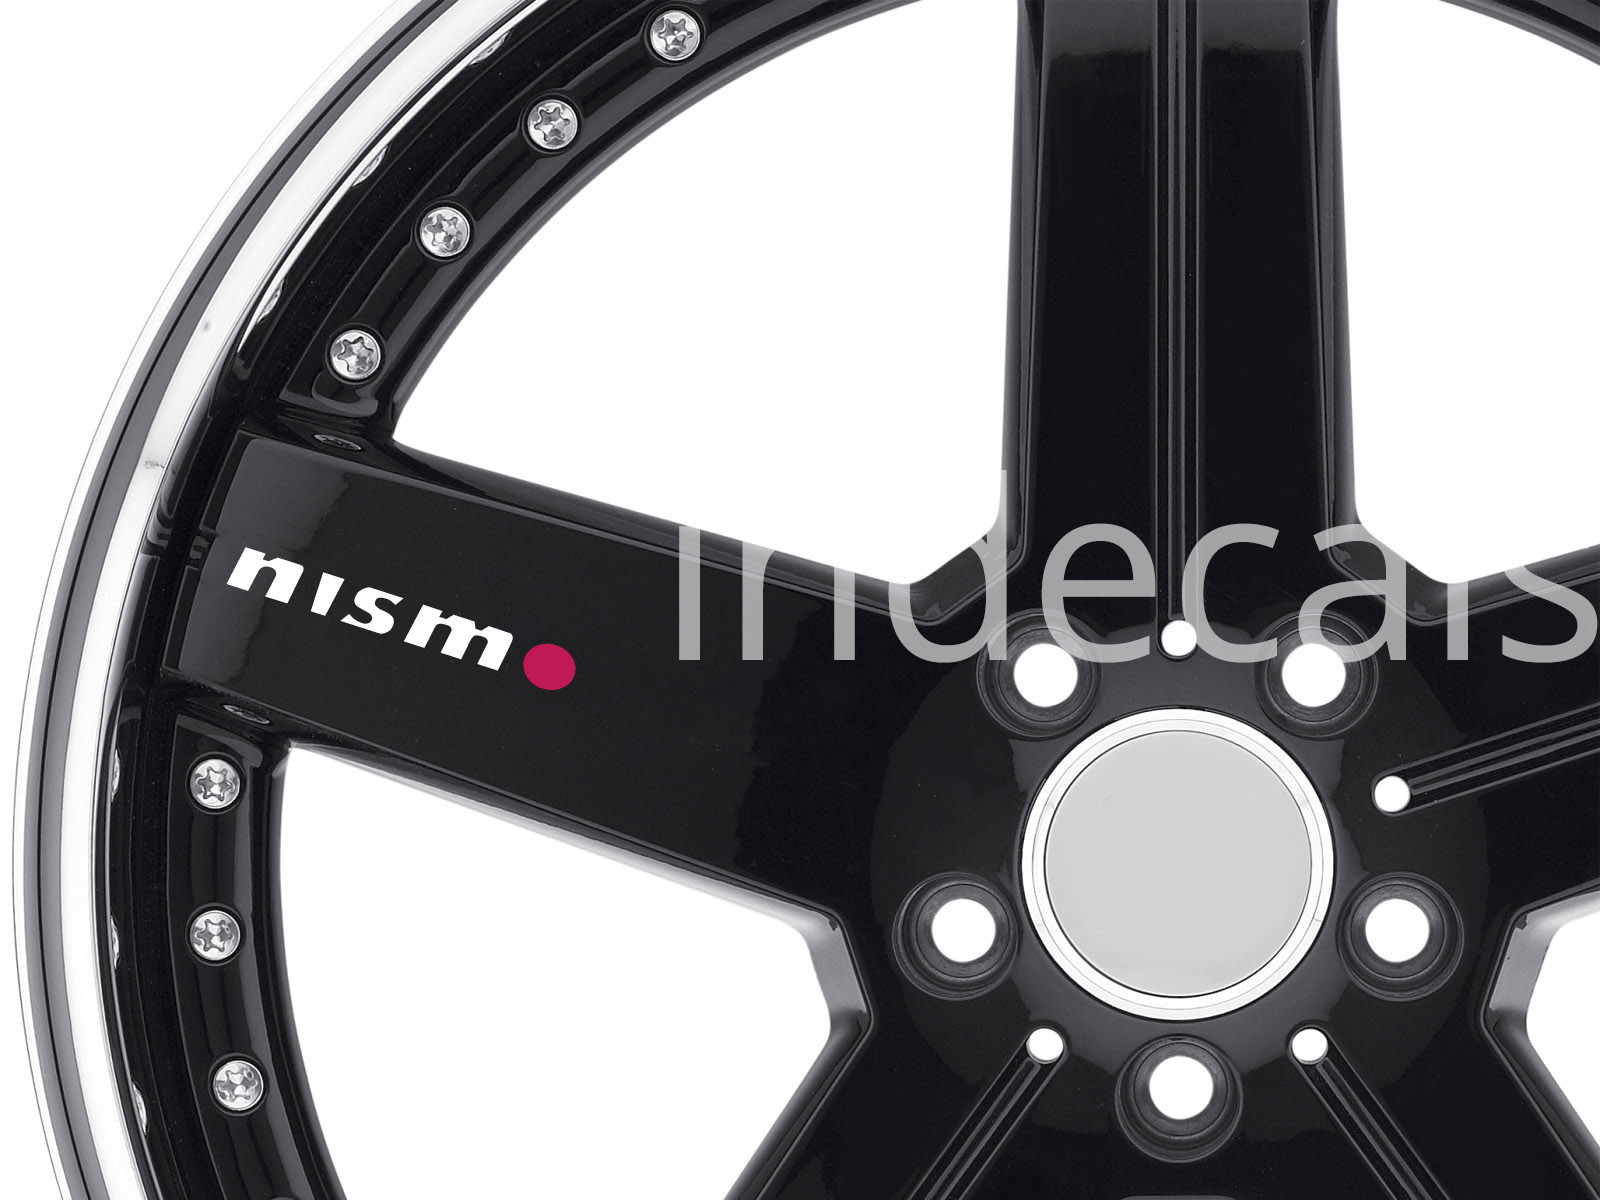 6 x Nismo Stickers for Wheels - White